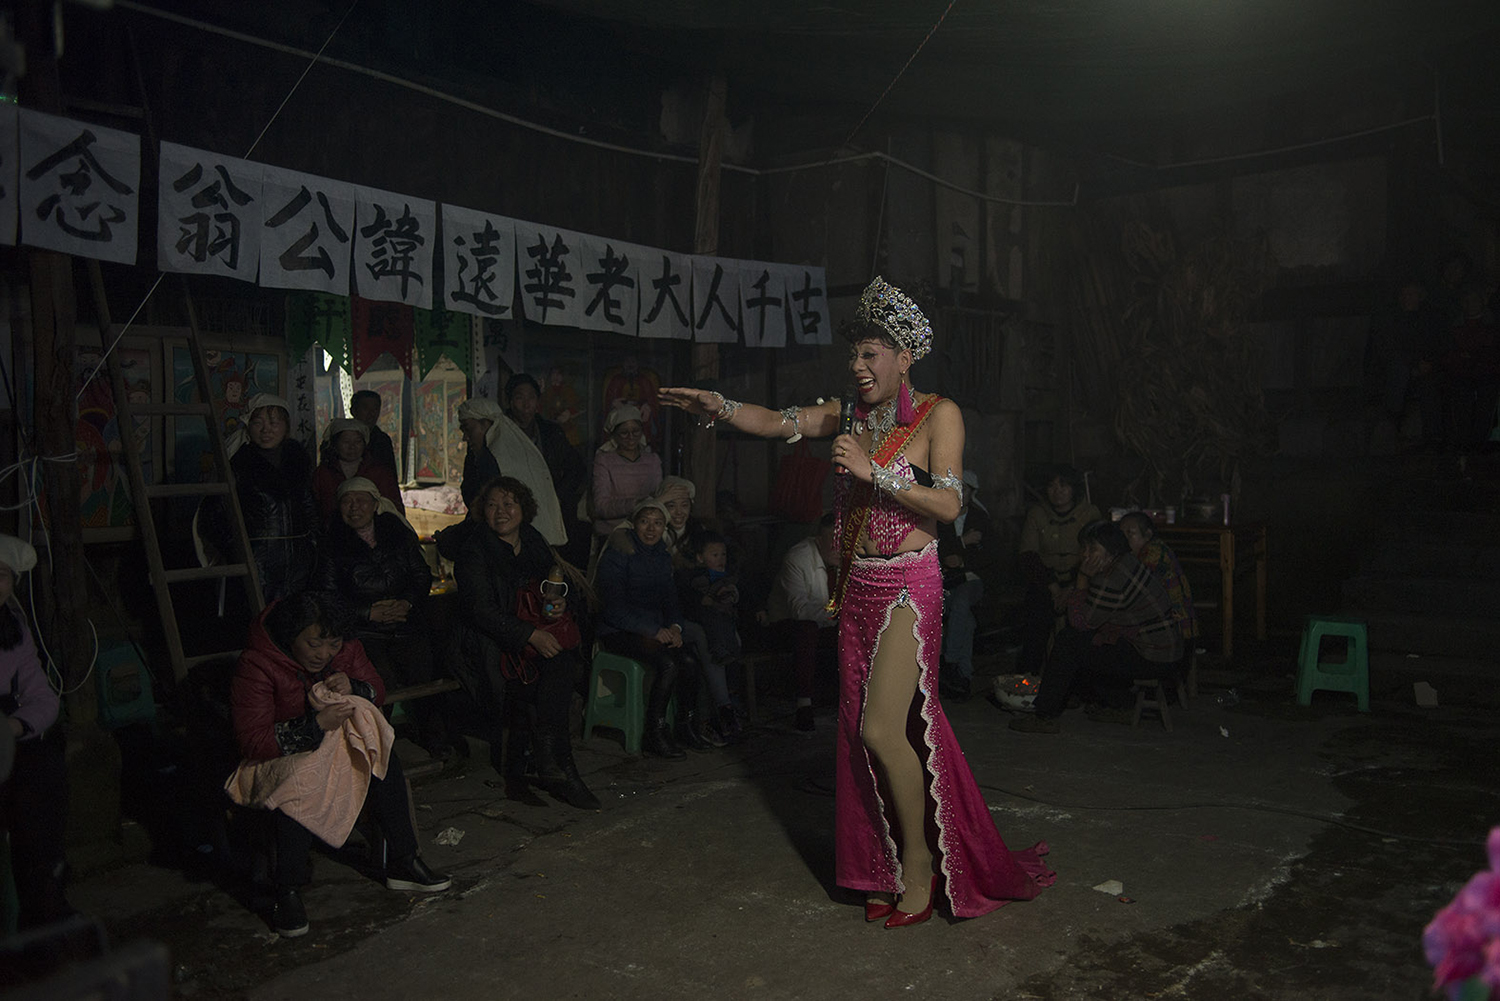 Drag queen Lala, 42, performs at a funeral in Qijiang district of Chongqing municipality, February 28, 2017. Lala is a friend of Liangzi, and she became a funeral performer around 2002.